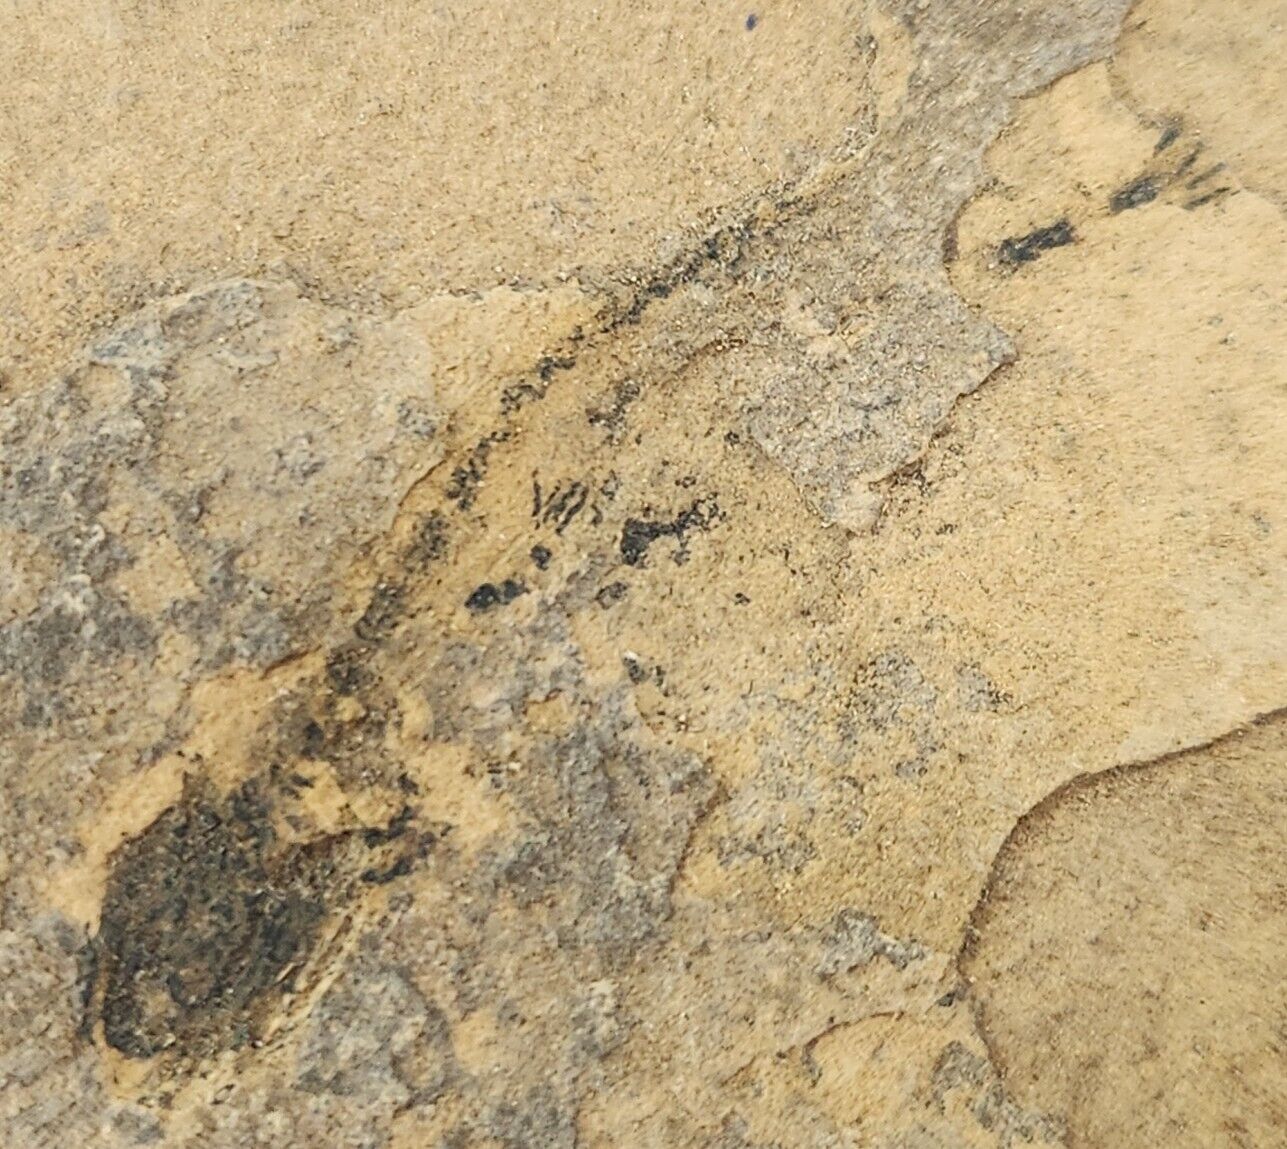 Apateon Fossil Amphibian in Plate - Germany 